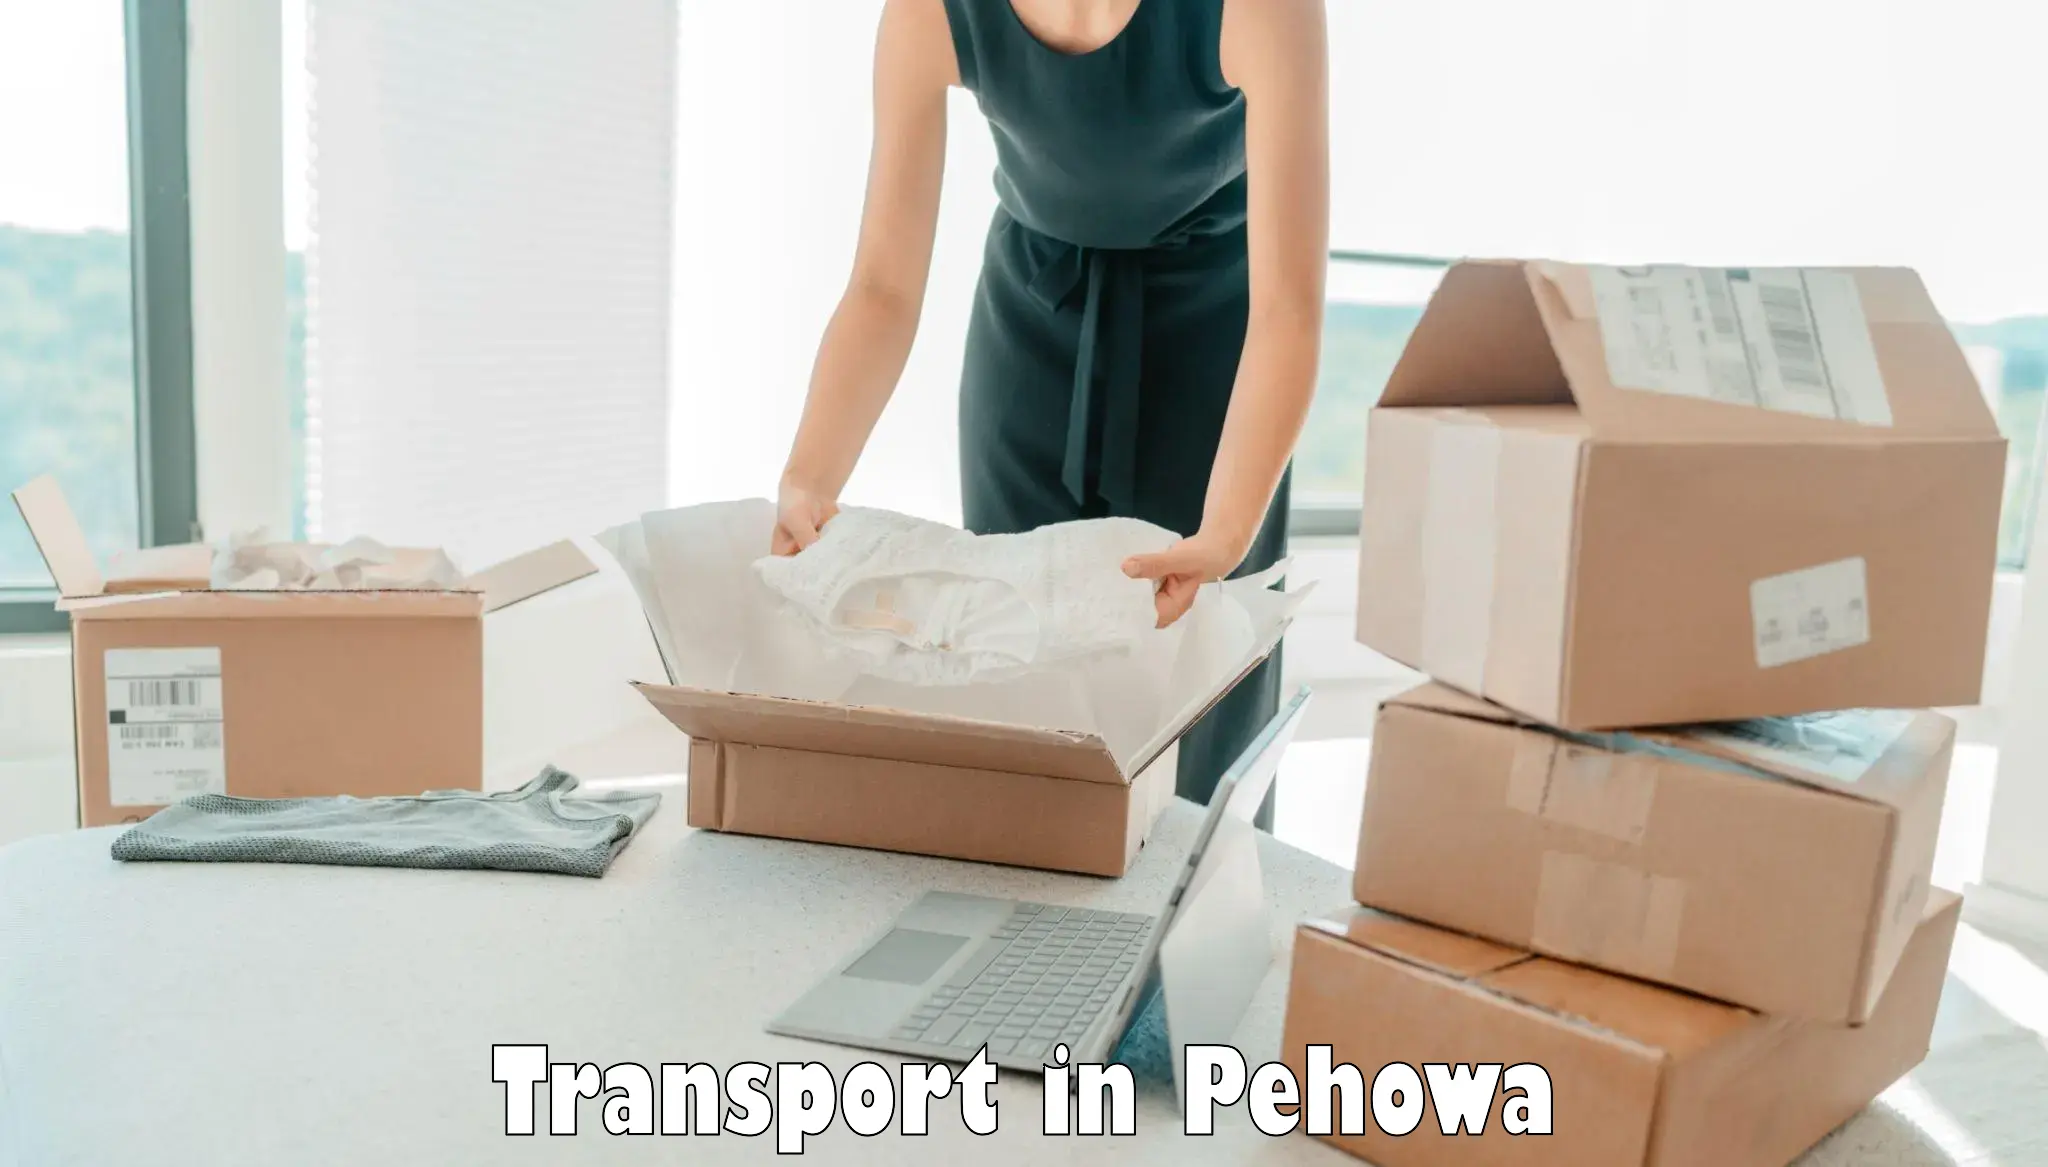 Daily transport service in Pehowa